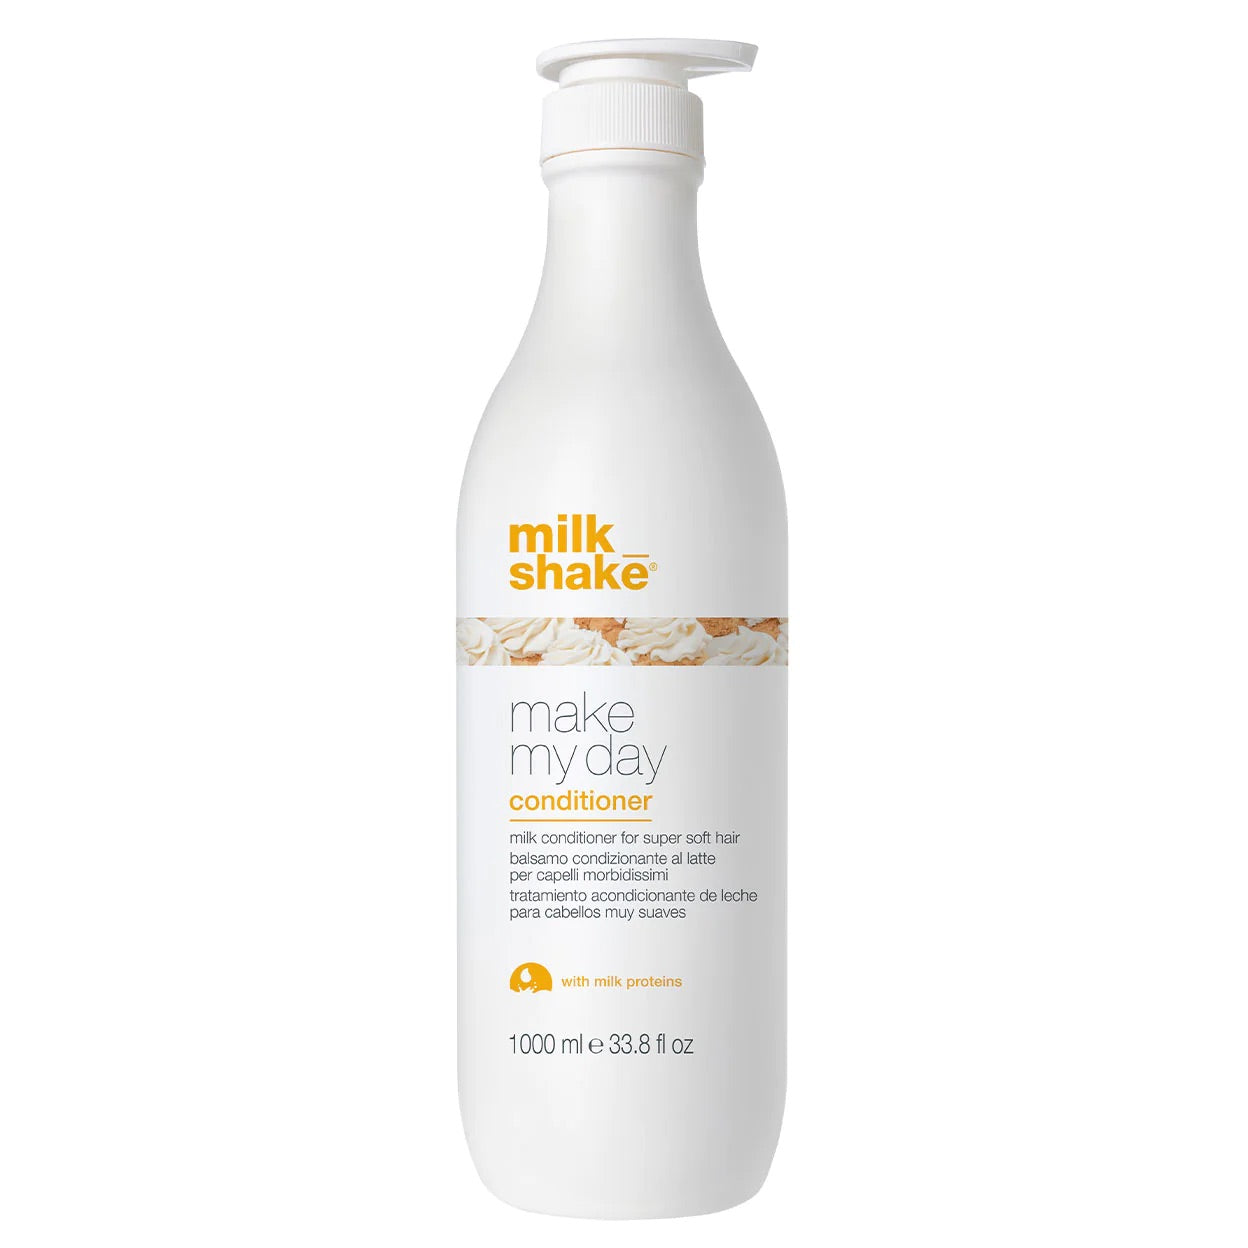 milk_shake make my day Litre Conditioner for super soft hair. Made with milk proteins. Exceptional professional hair care products.